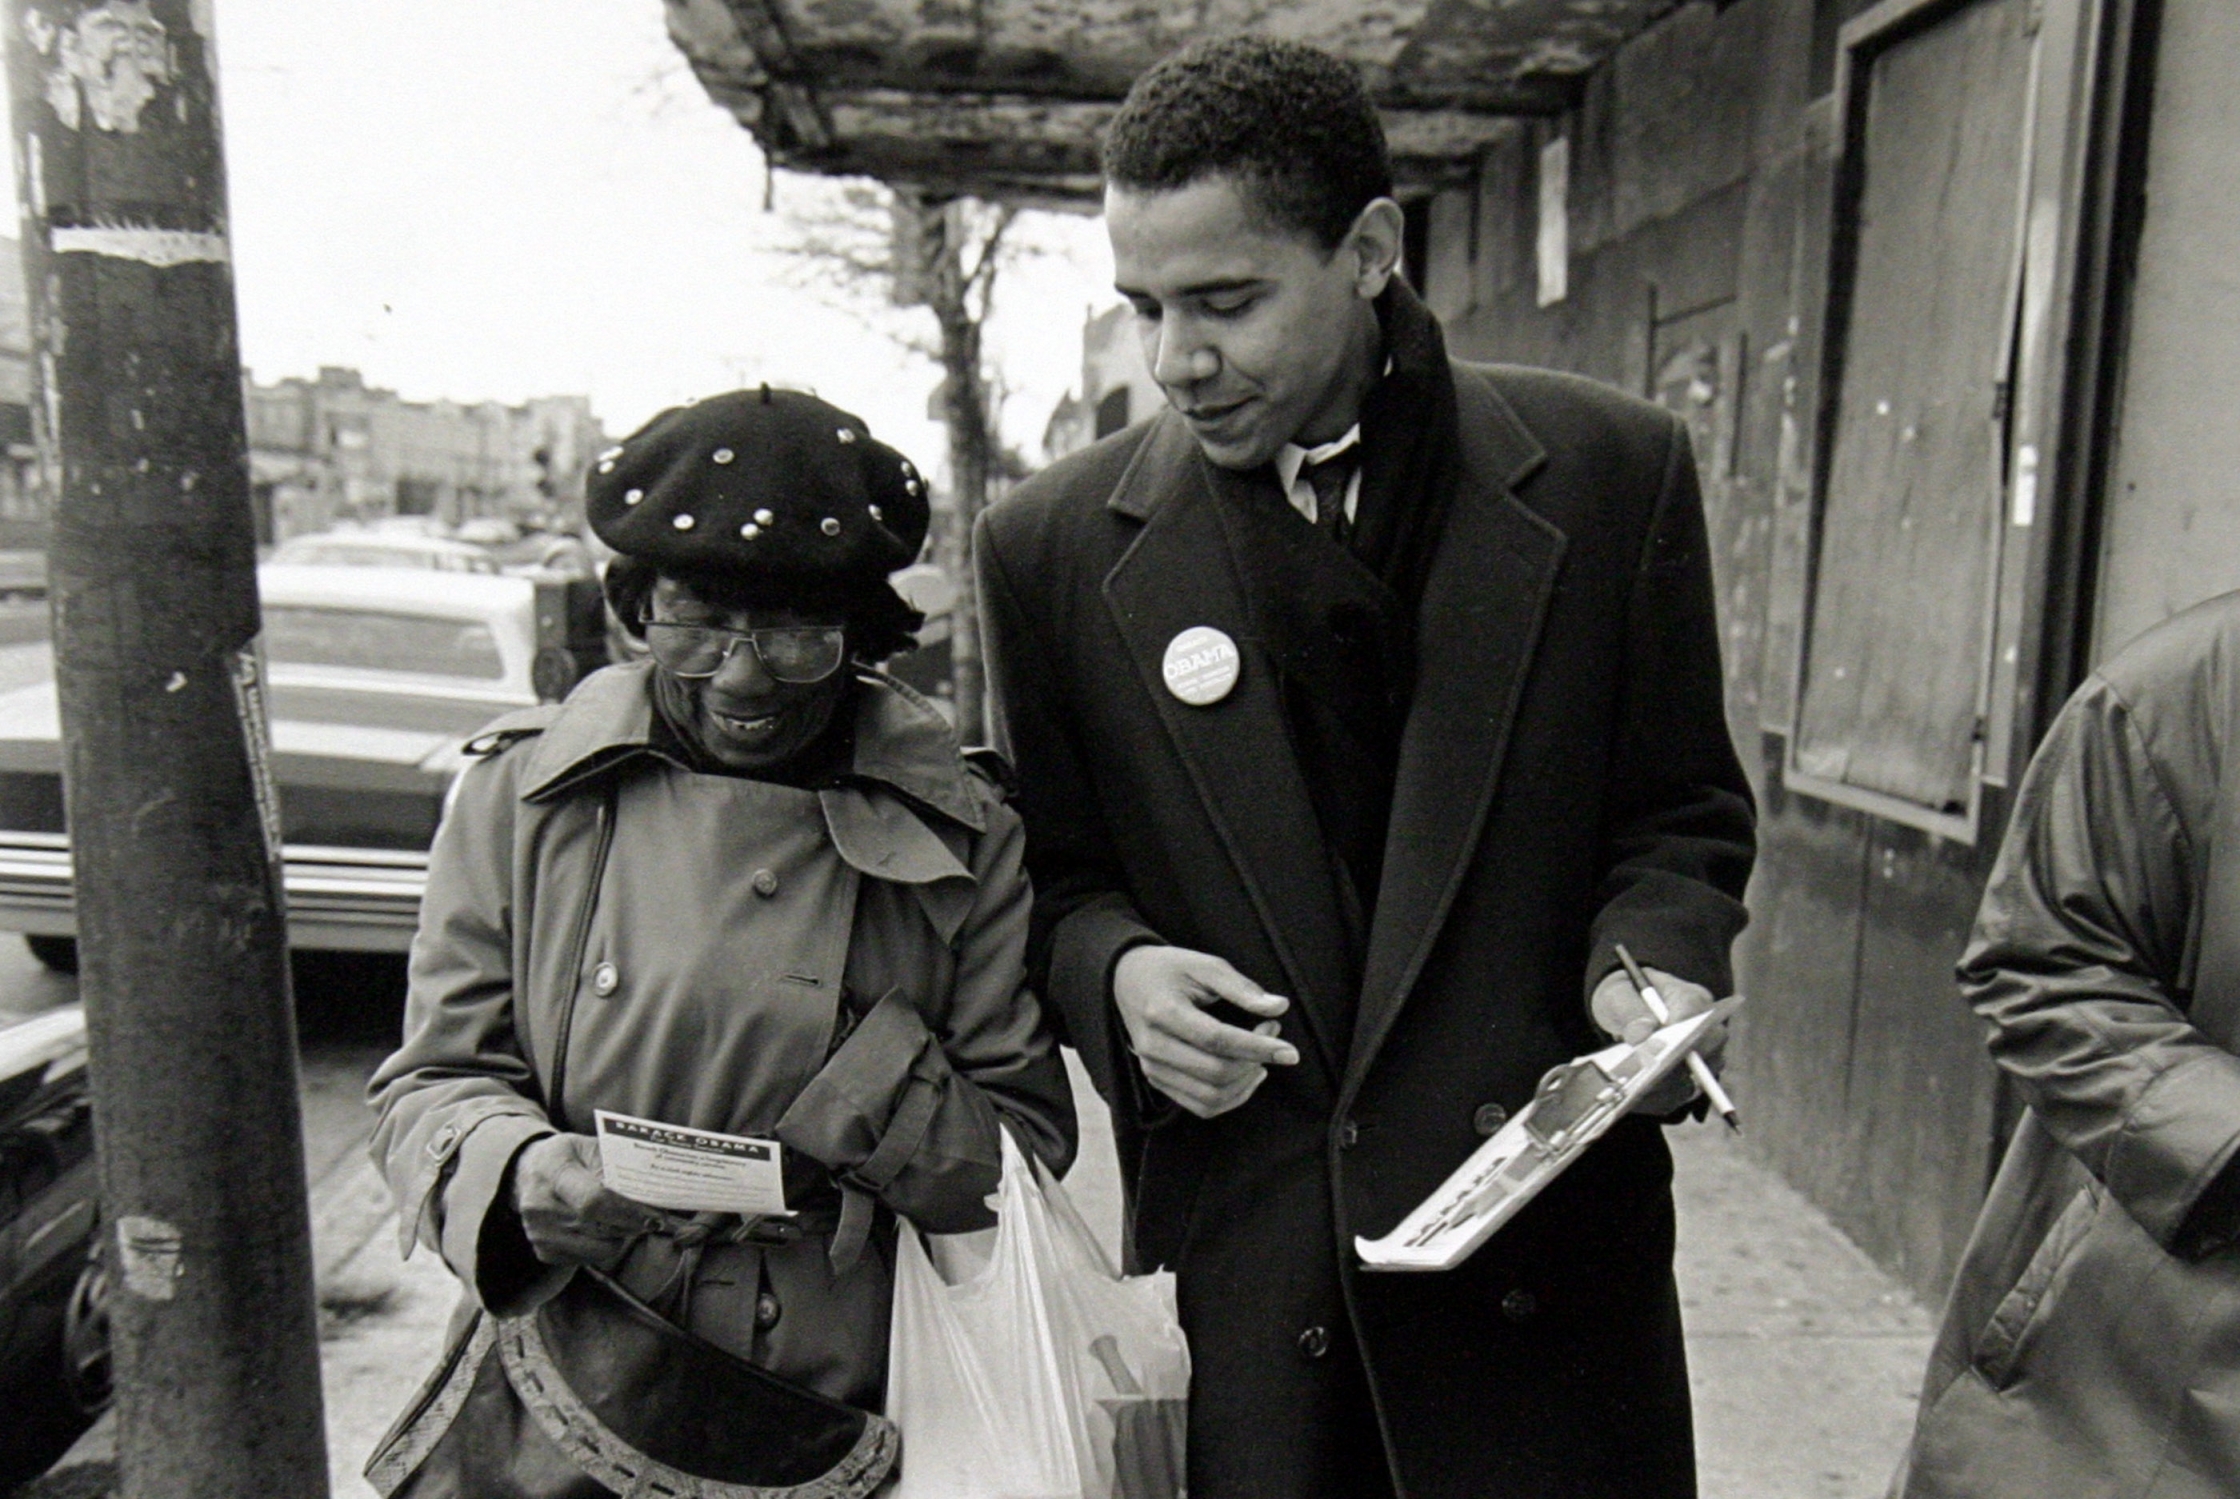 Depicted is President Obama when he served as a community organizer in the South Side of Chicago. 